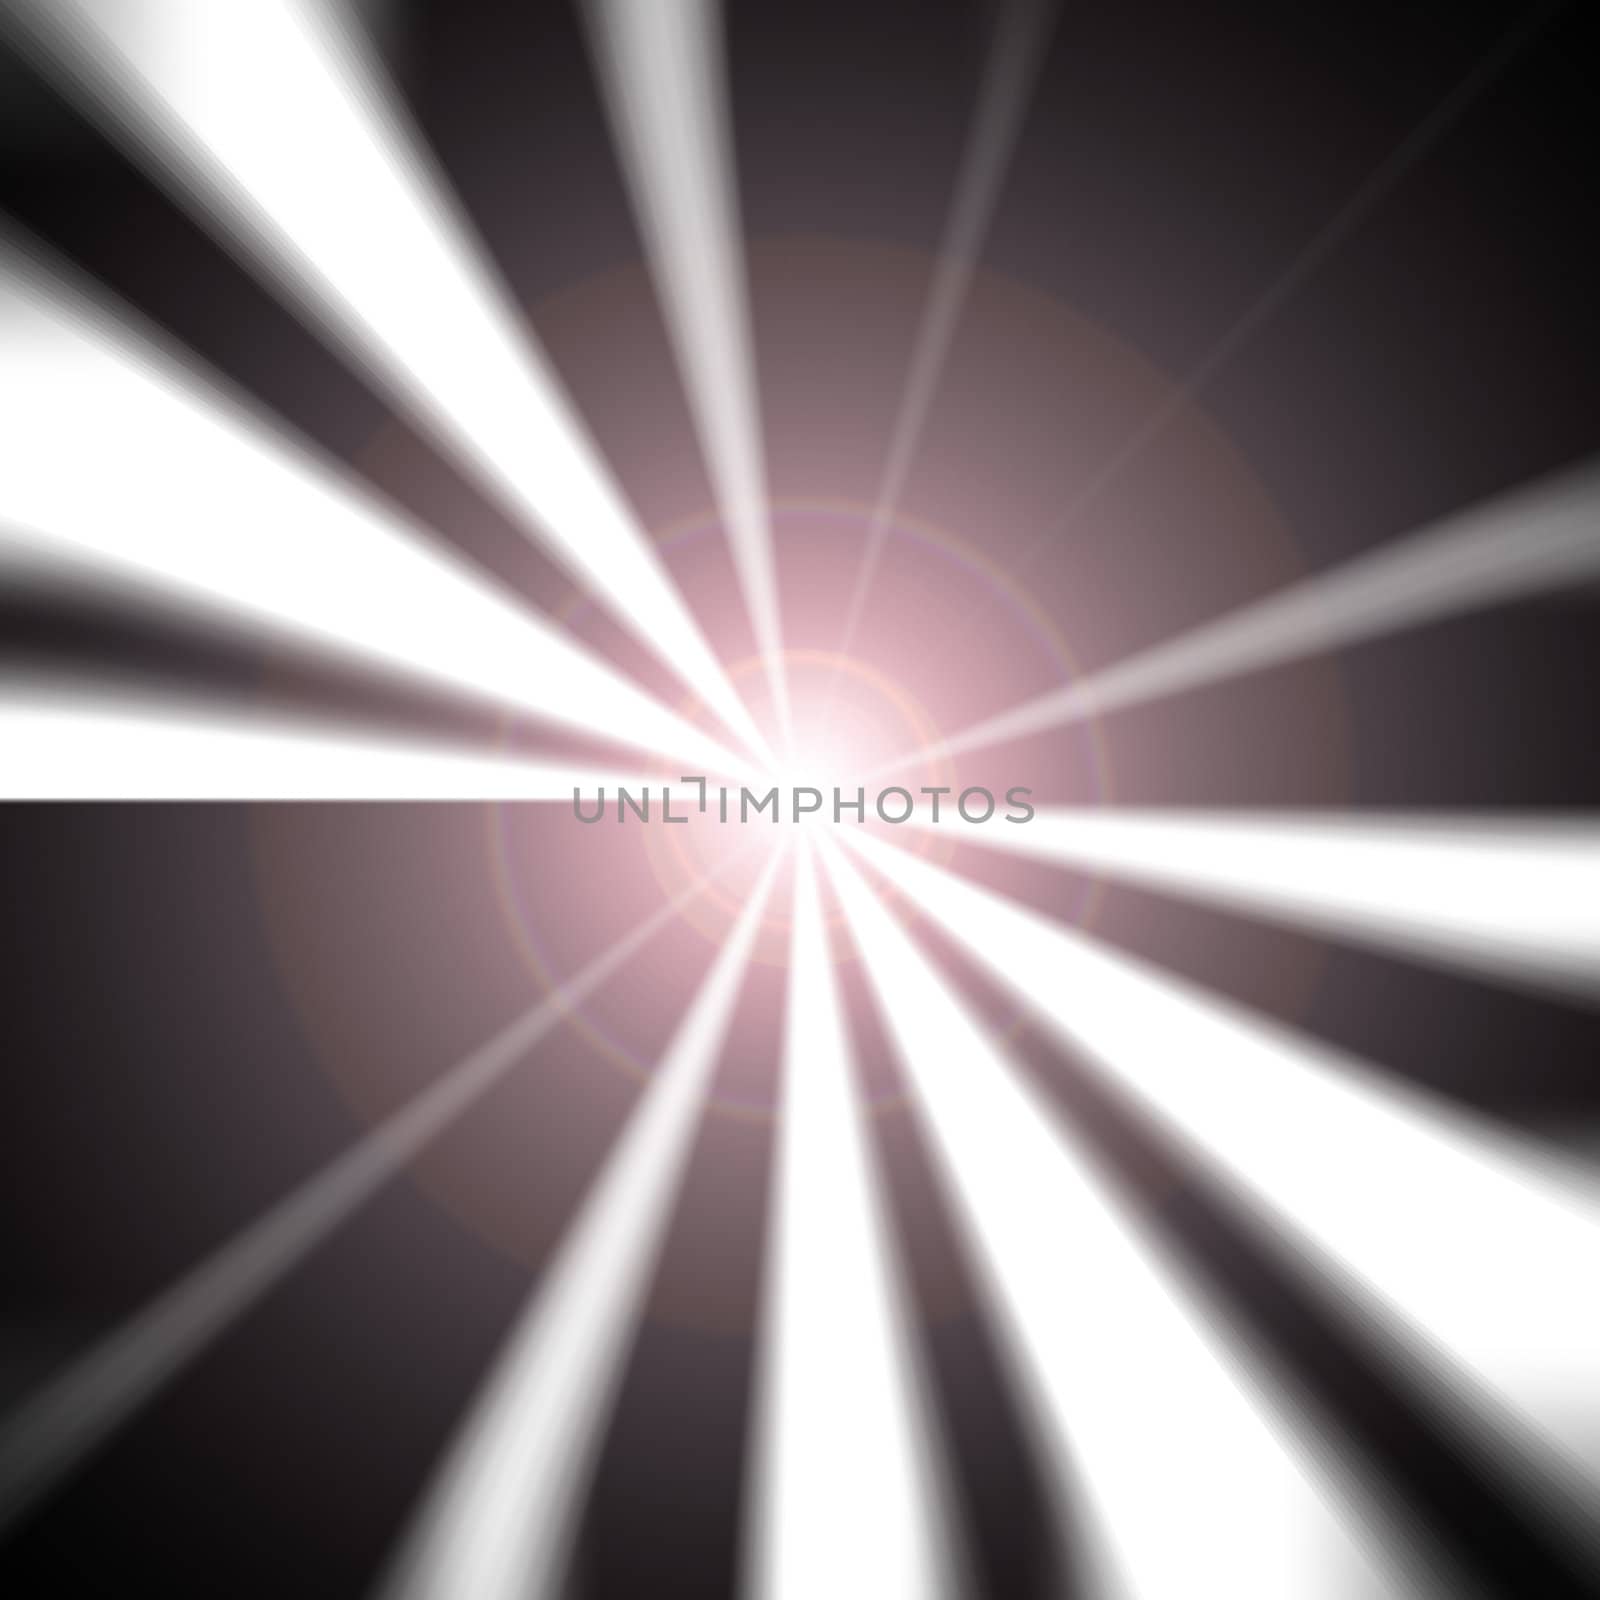 A black and white vortex with a lens flare right in the middle.